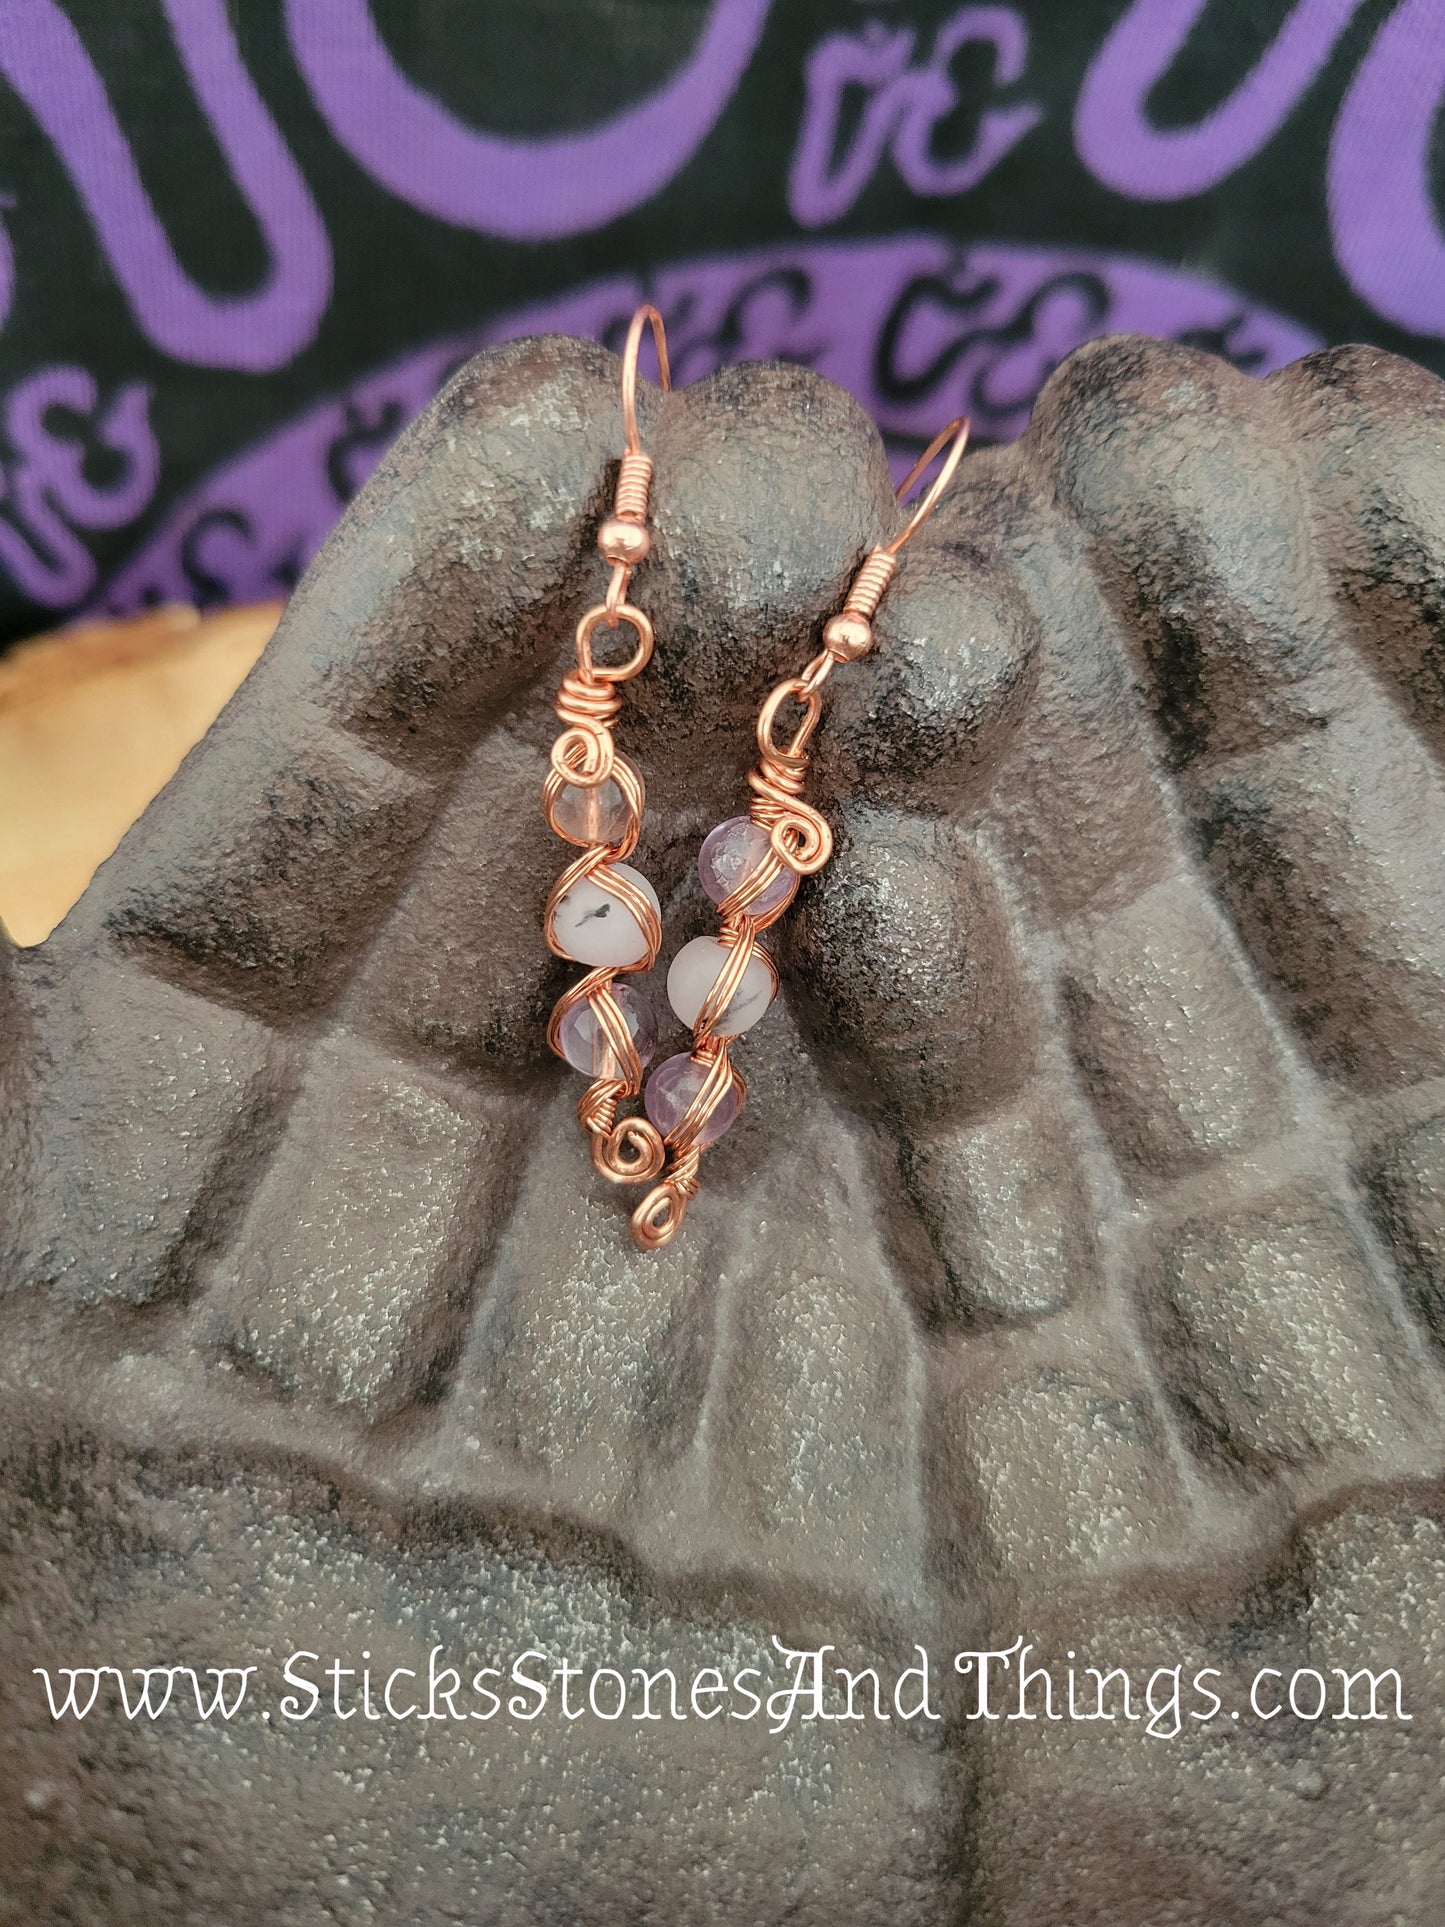 Amethyst and Tourmalated Lavender Quartz Wire-Wrapped Earrings